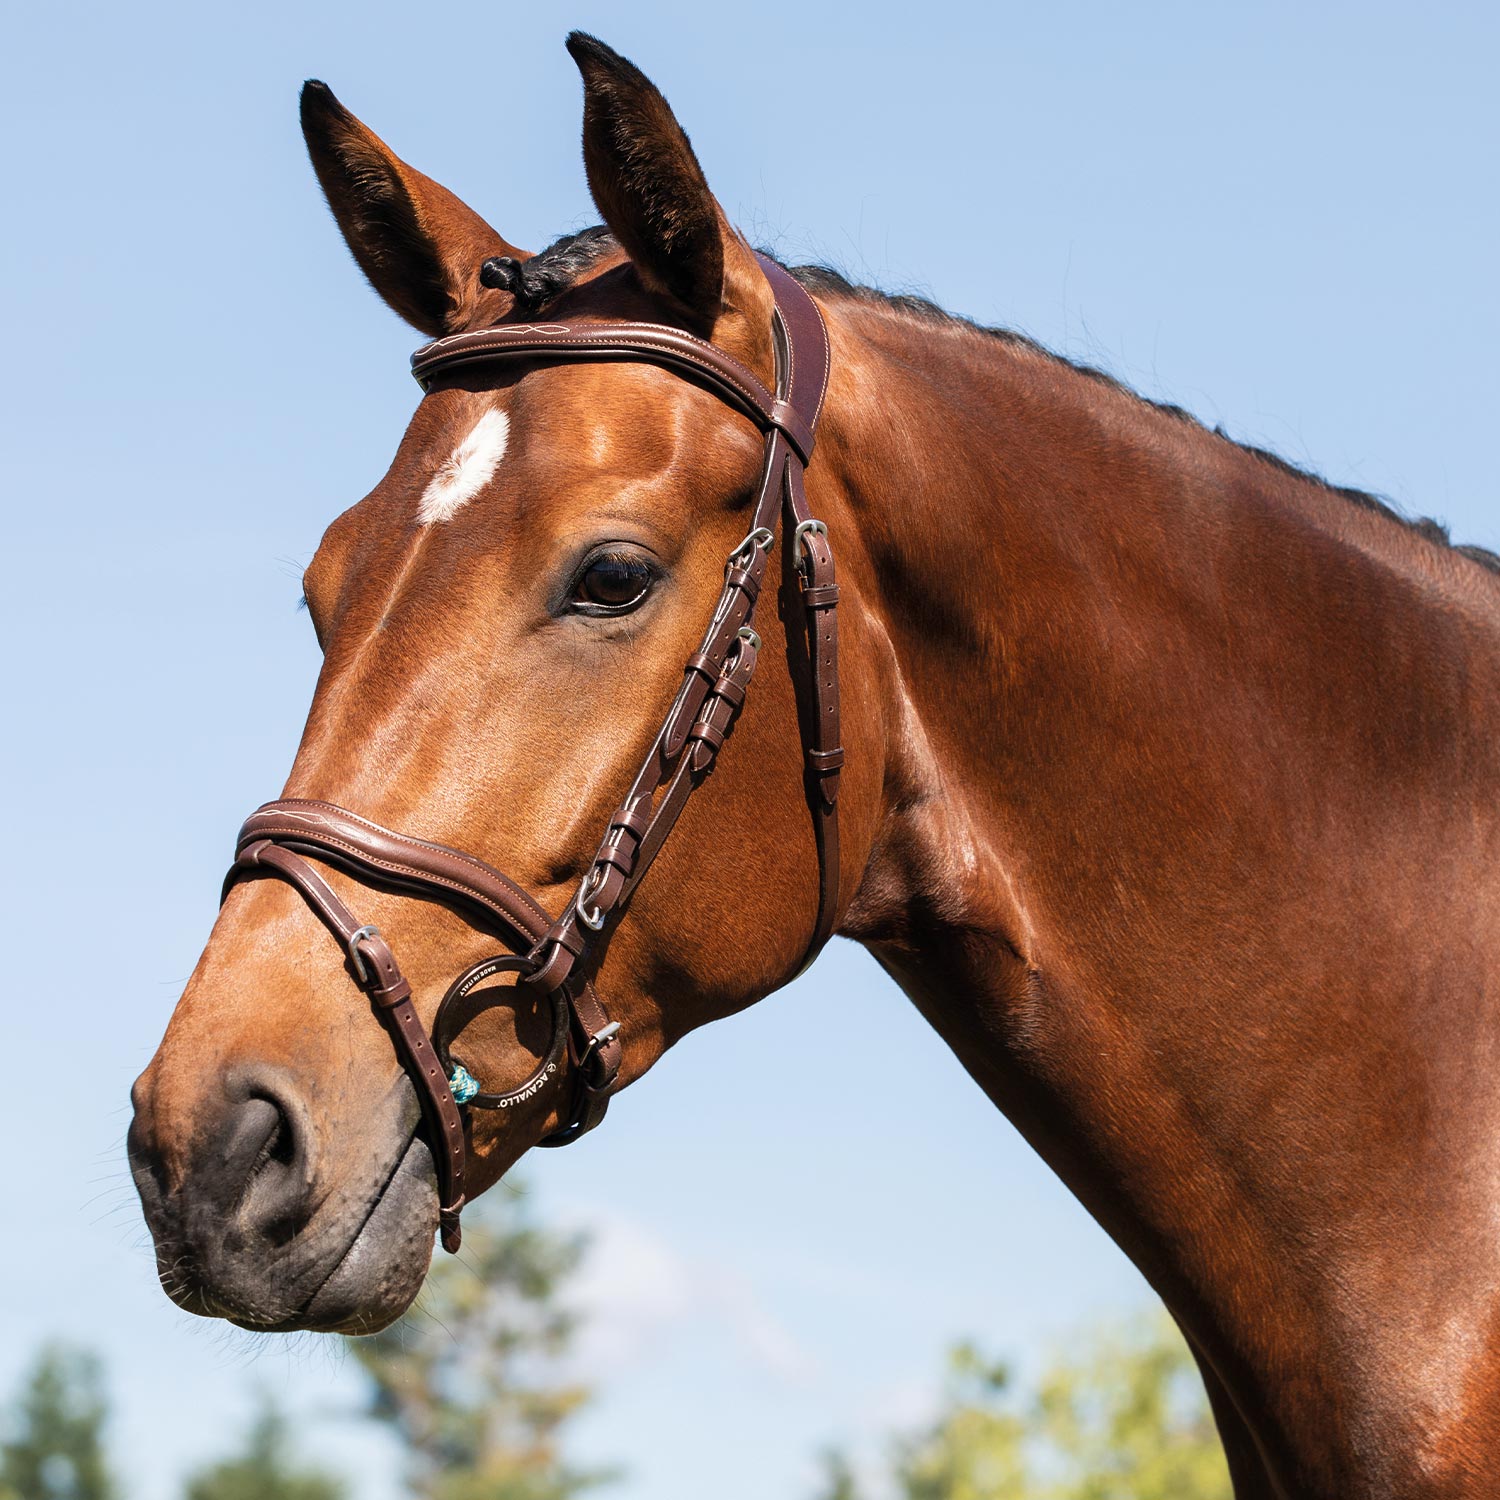 Anatomic show jumping bridle